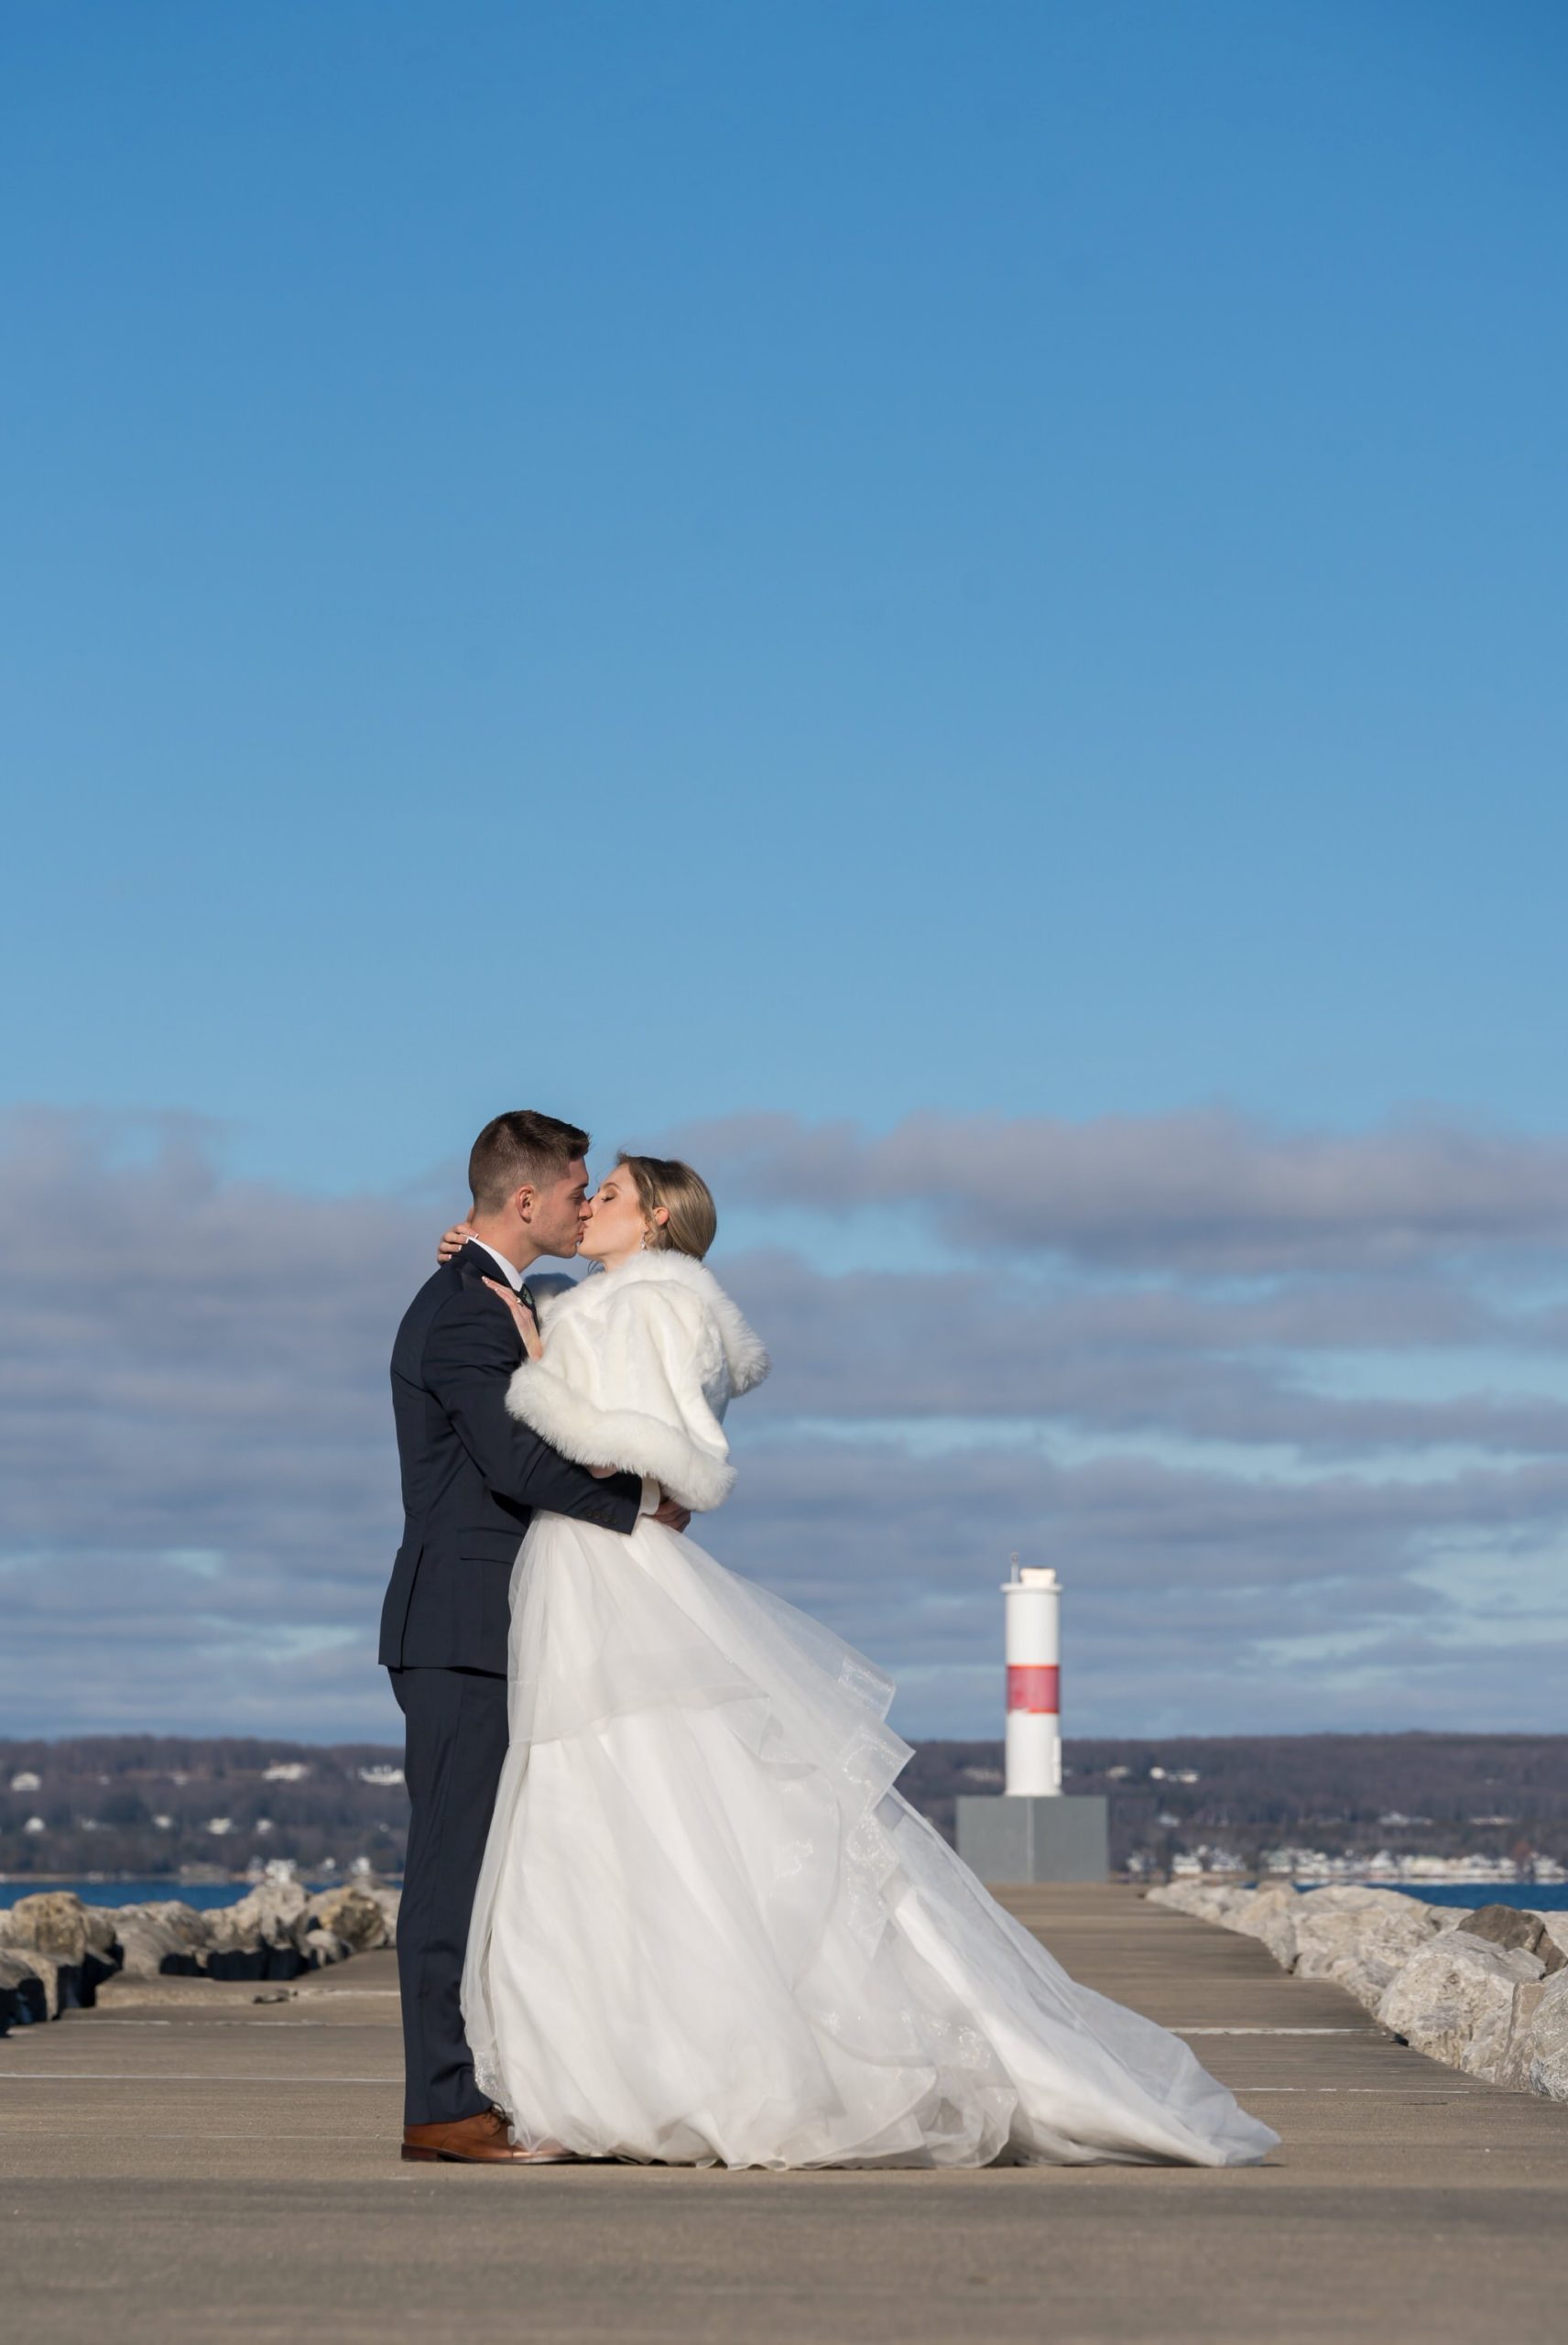 A bride and groom kiss near the Petoskey Pierhead Lighthouse before their Bay Harbor wedding ceremony.  